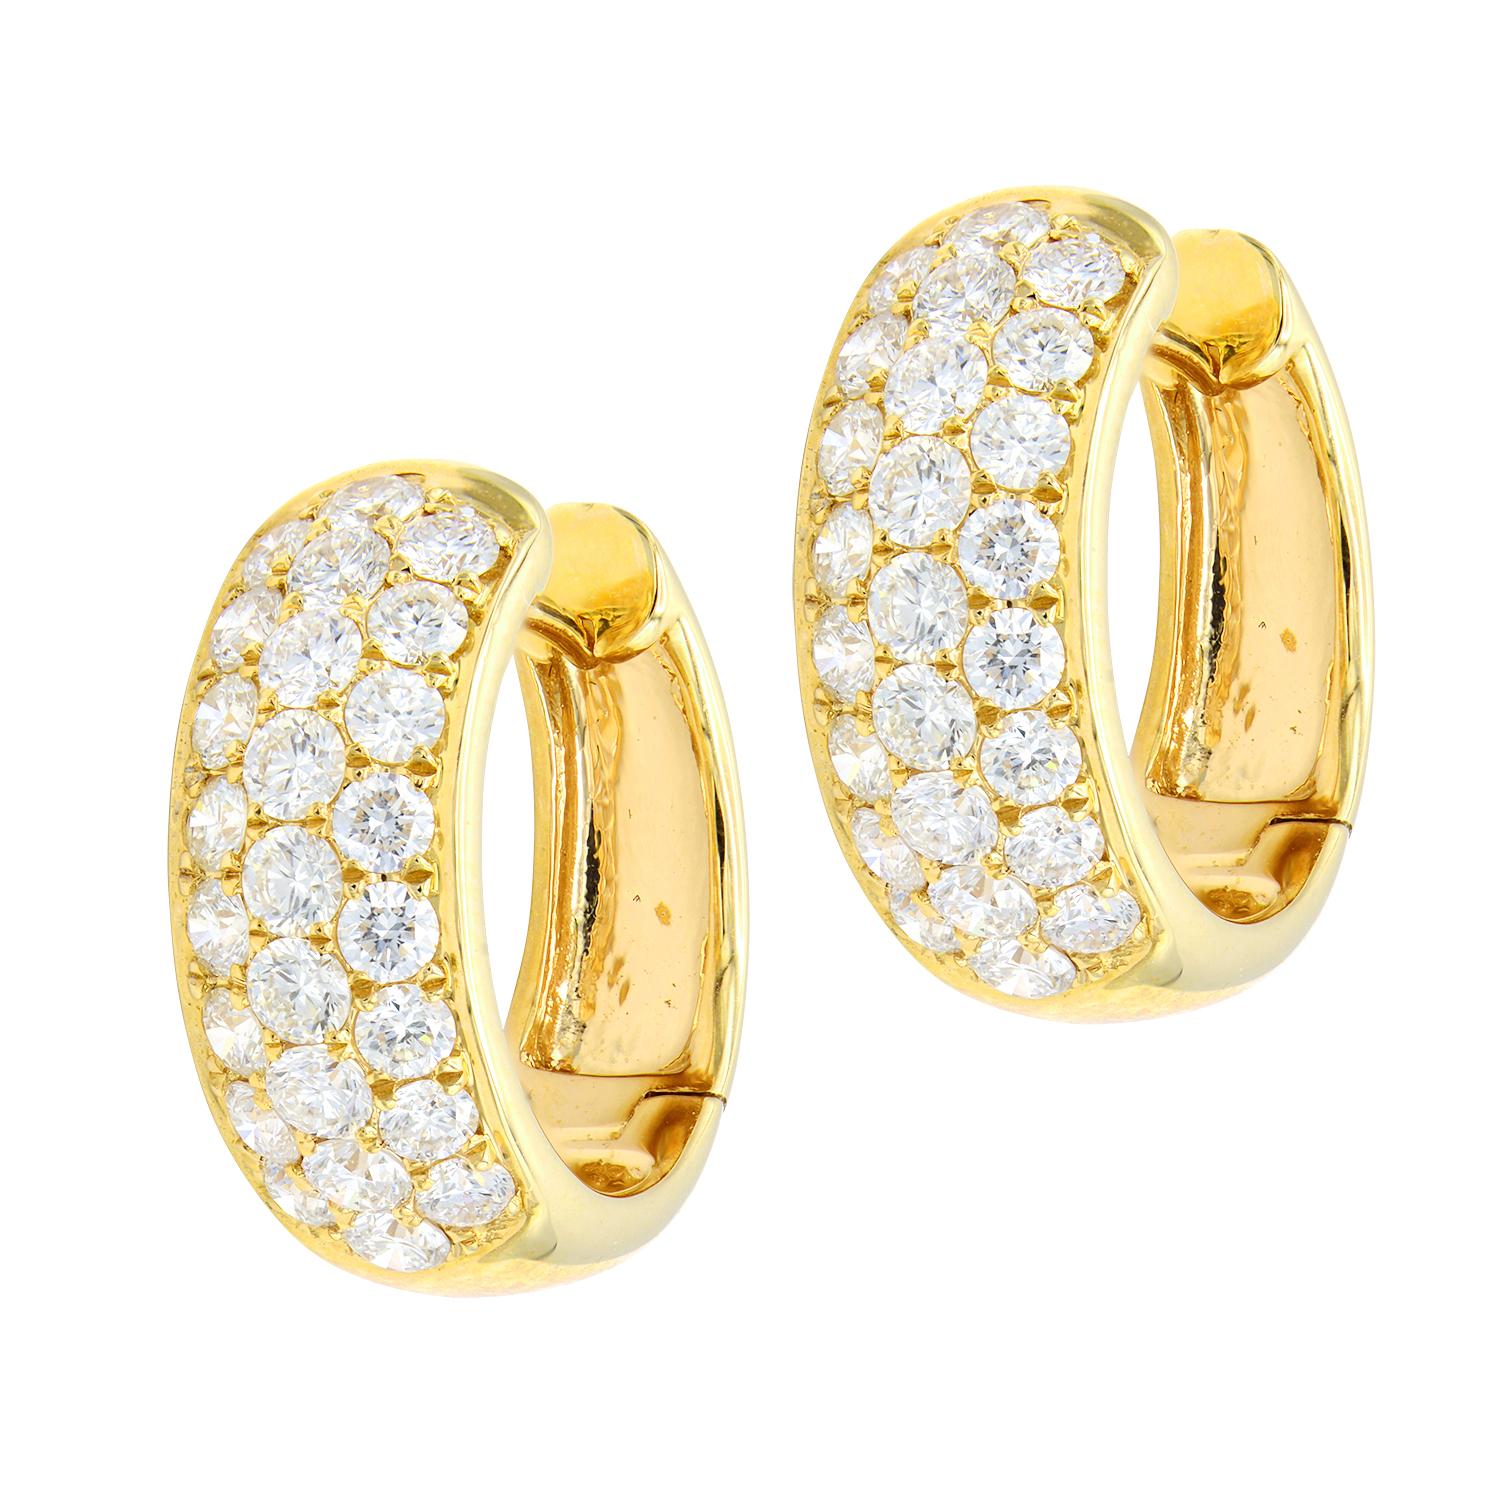 14 Karat Yellow gold hoop earrings featuring three rows of round brilliants weighing 1.50 carats.
50 Diamonds
Color G-H
Clarity SI
